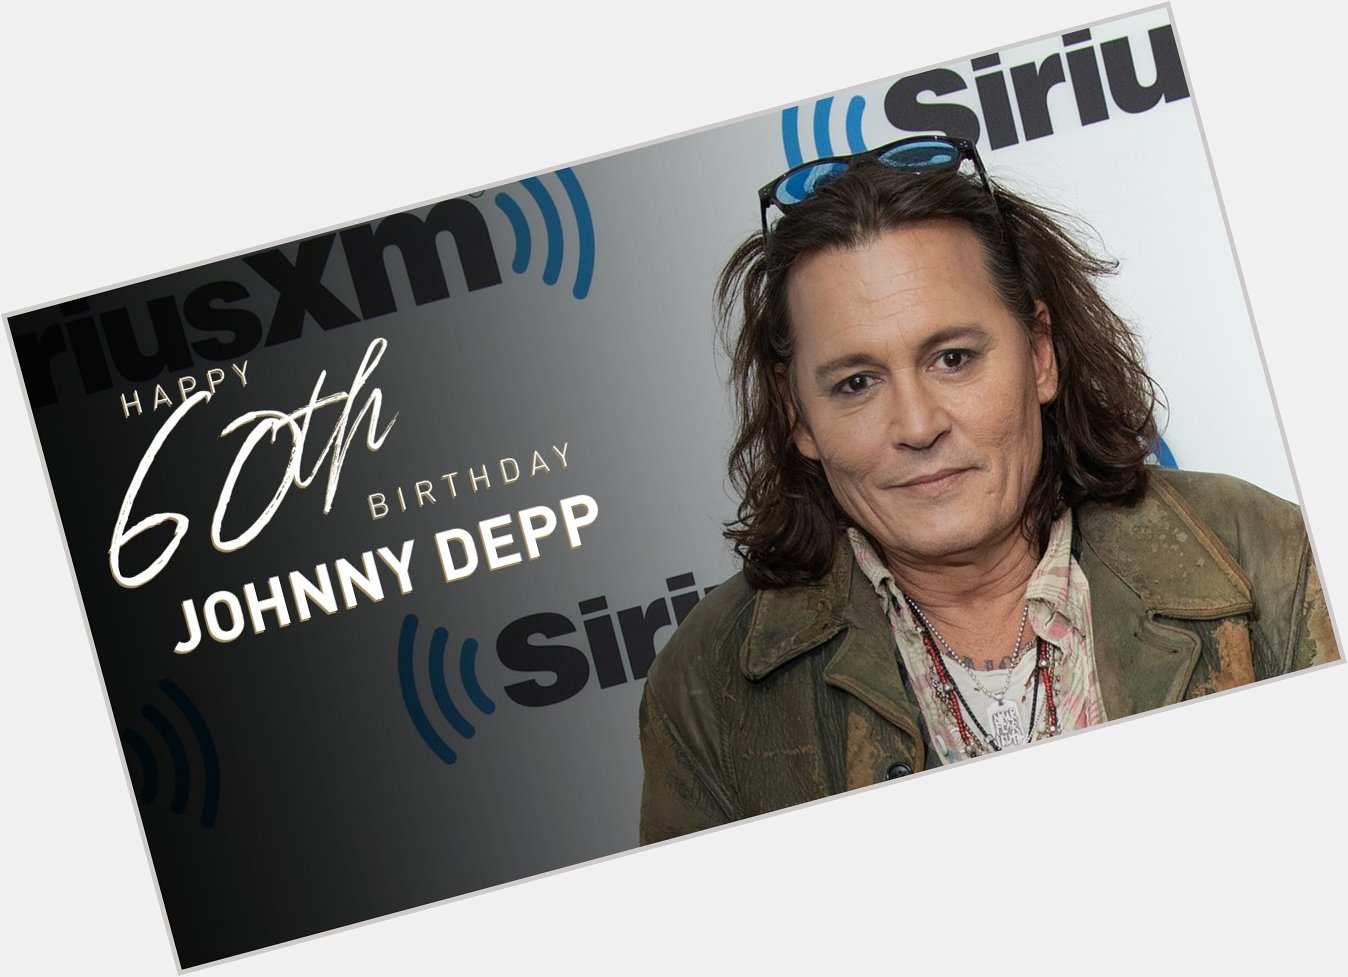 Happy 60th birthday Johnny Depp!

Read his tribute here:  